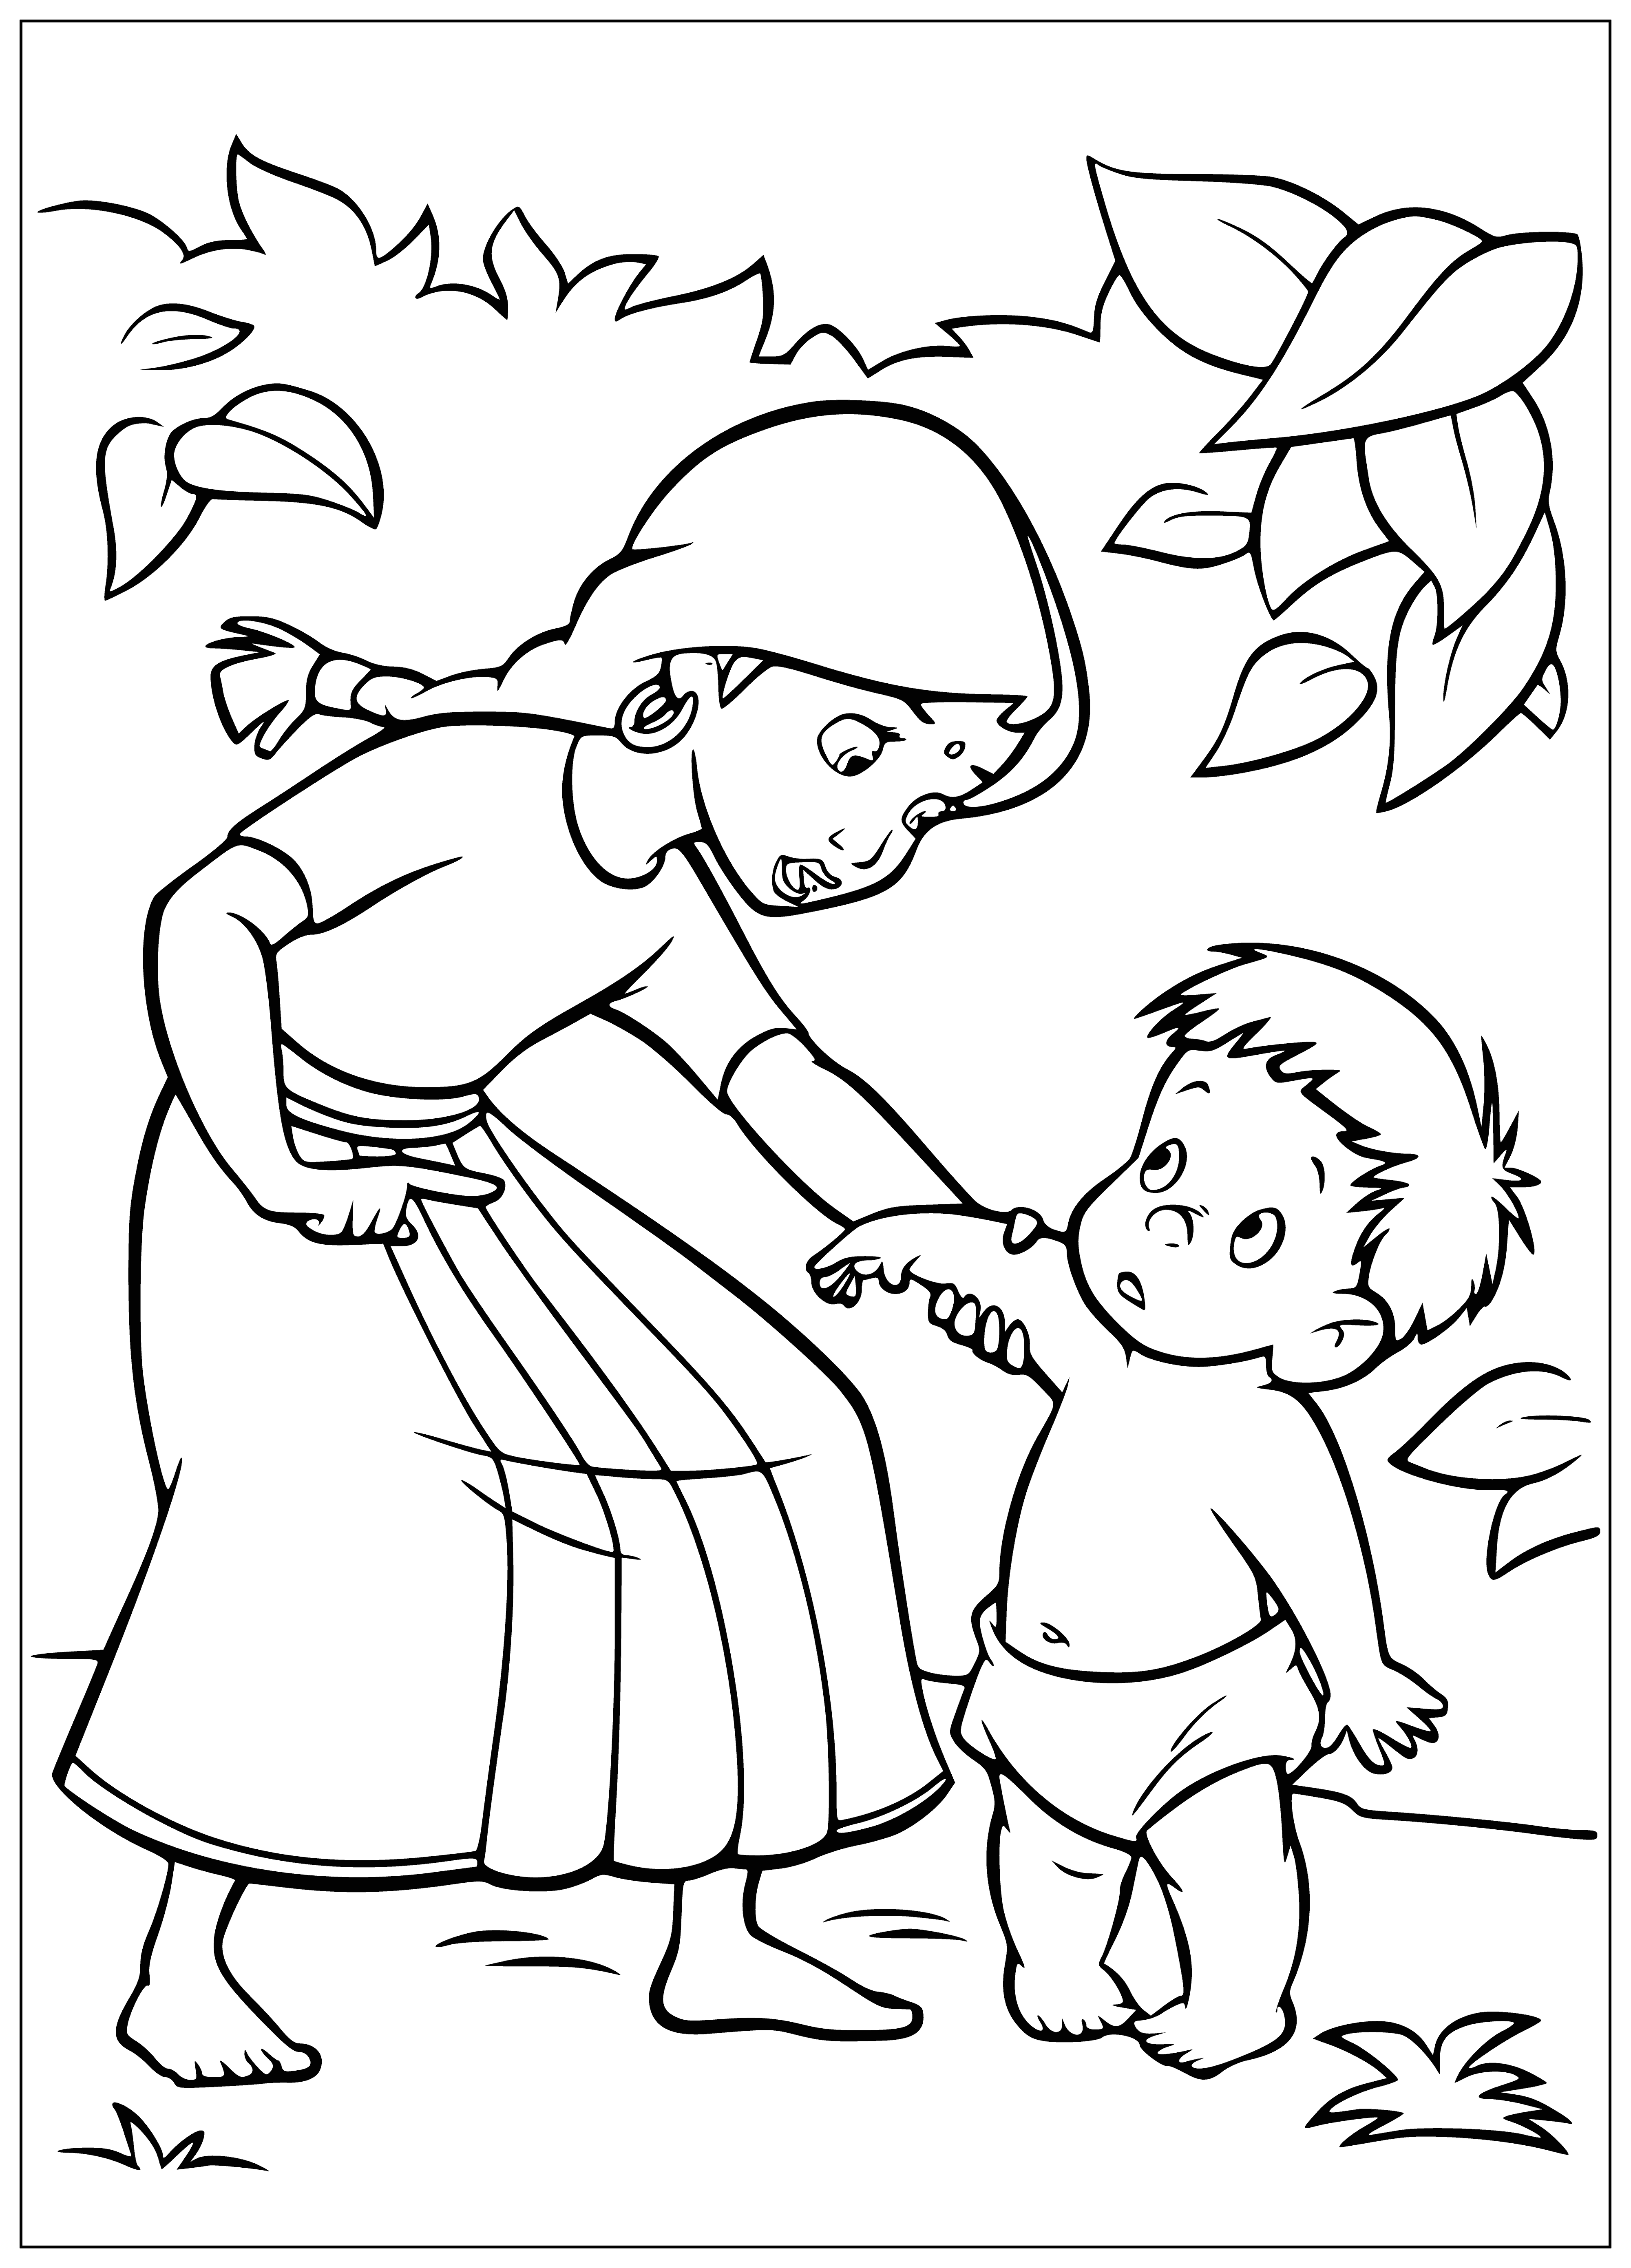 Sister and brother coloring page